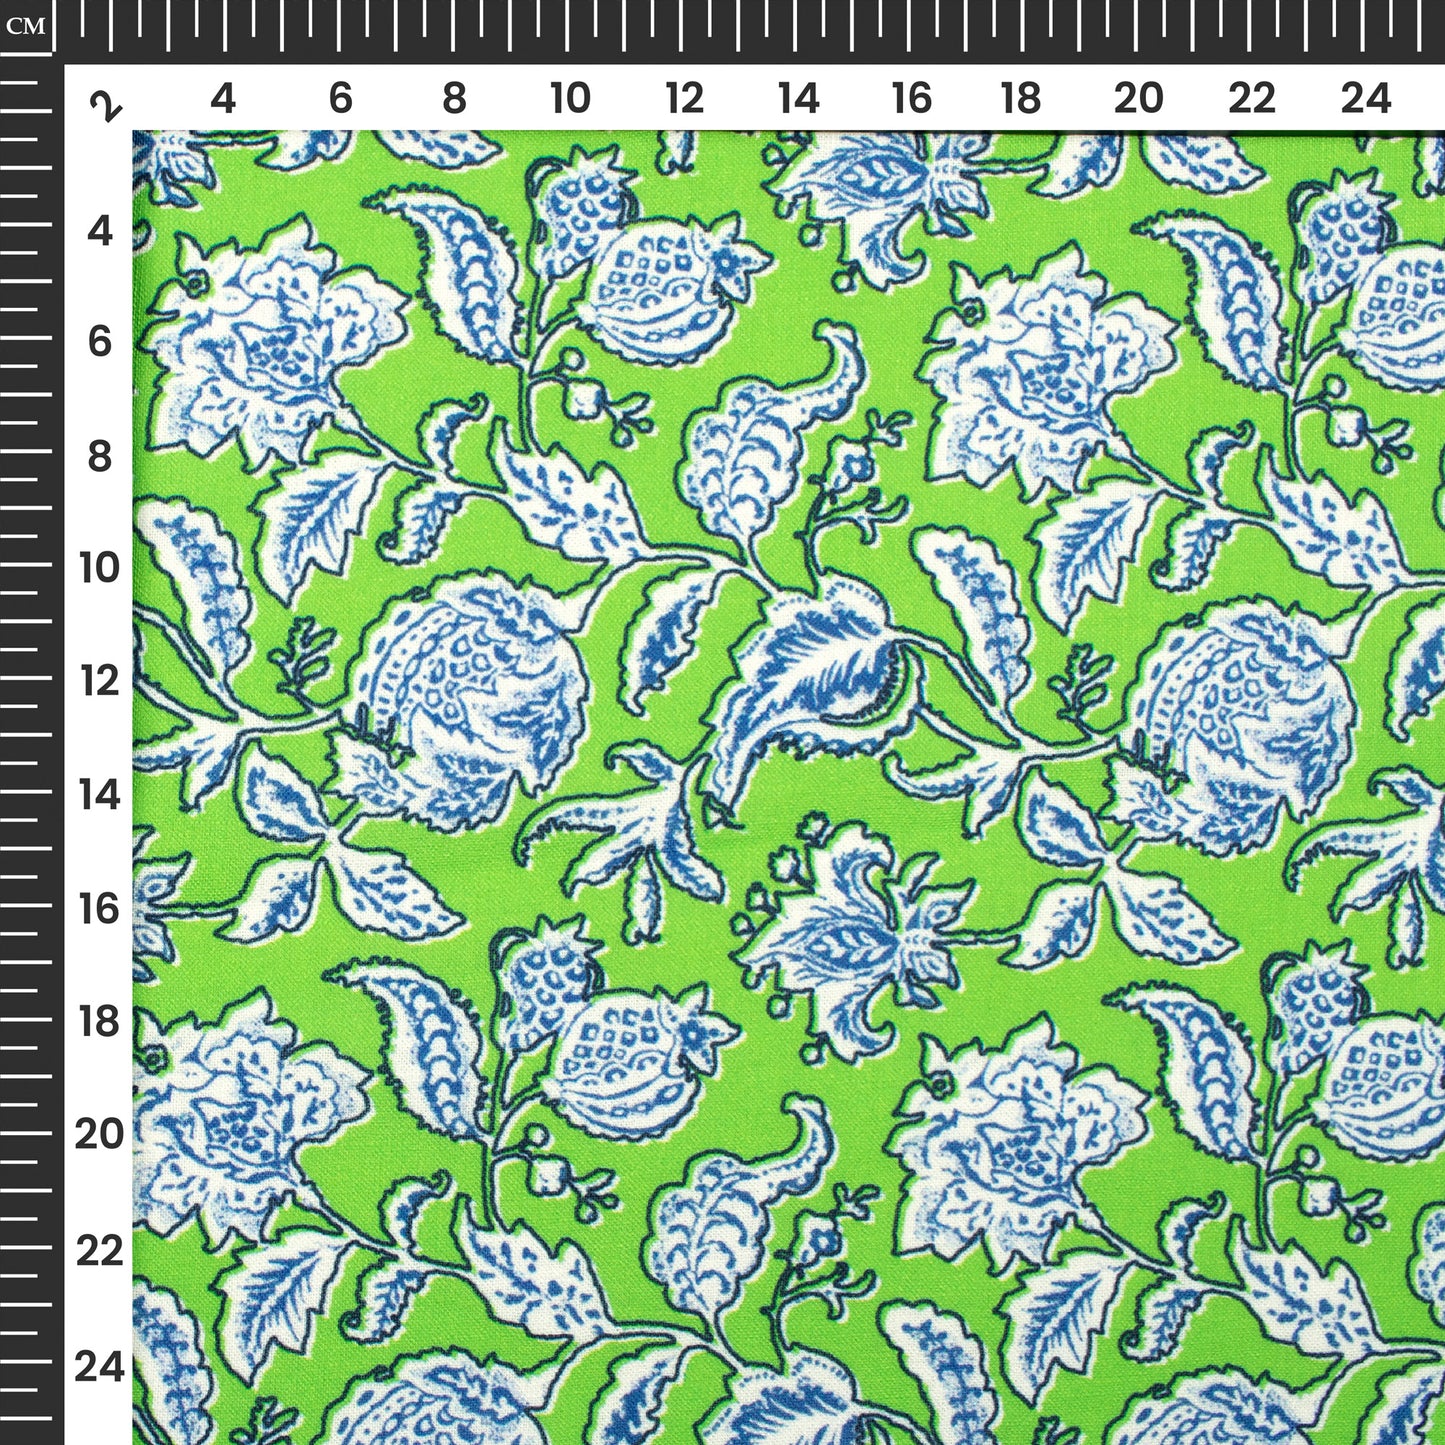 Chartreuse Green Floral Digital Print Linen Textured Fabric (Width 56 Inches)